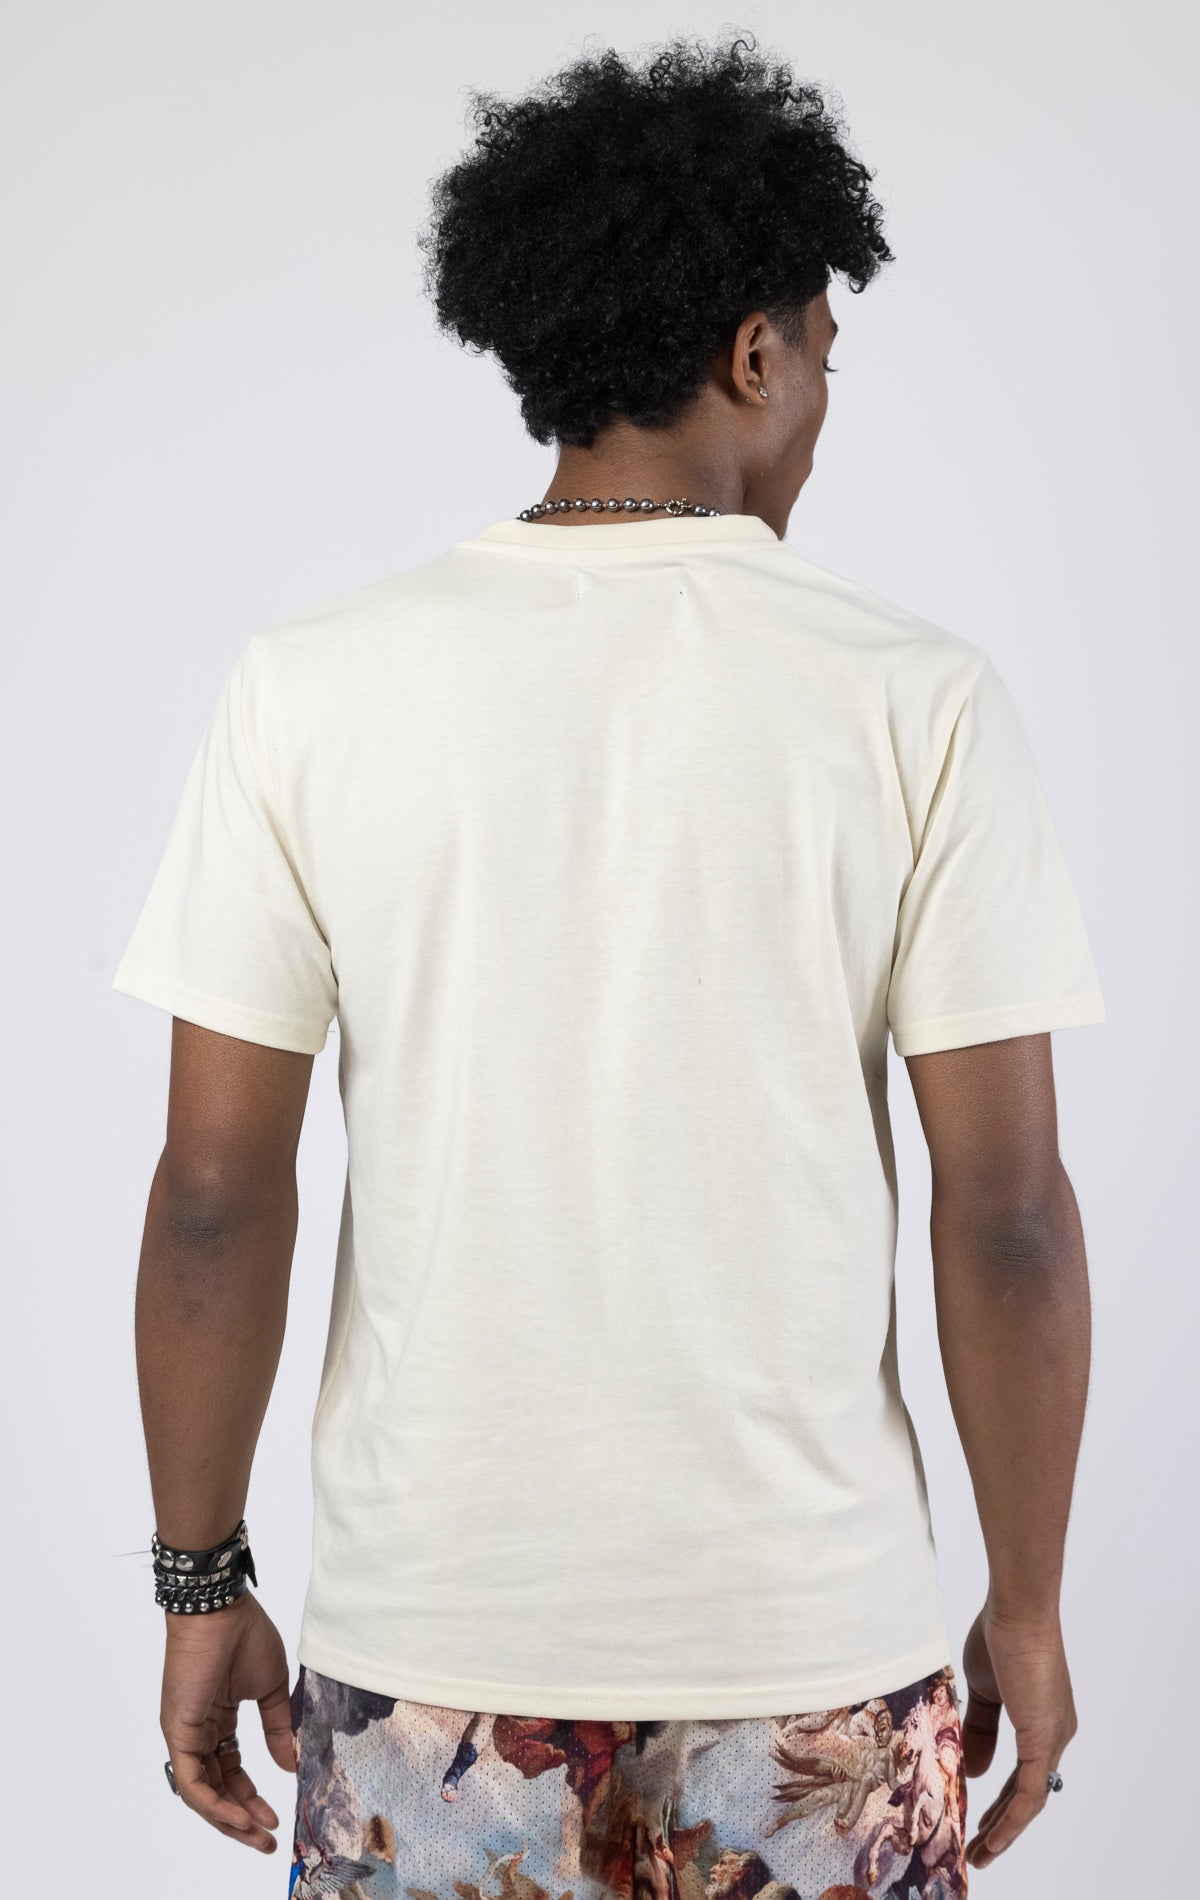 A crew neck graphic t-shirt with a Genesis design, available in creme and black.